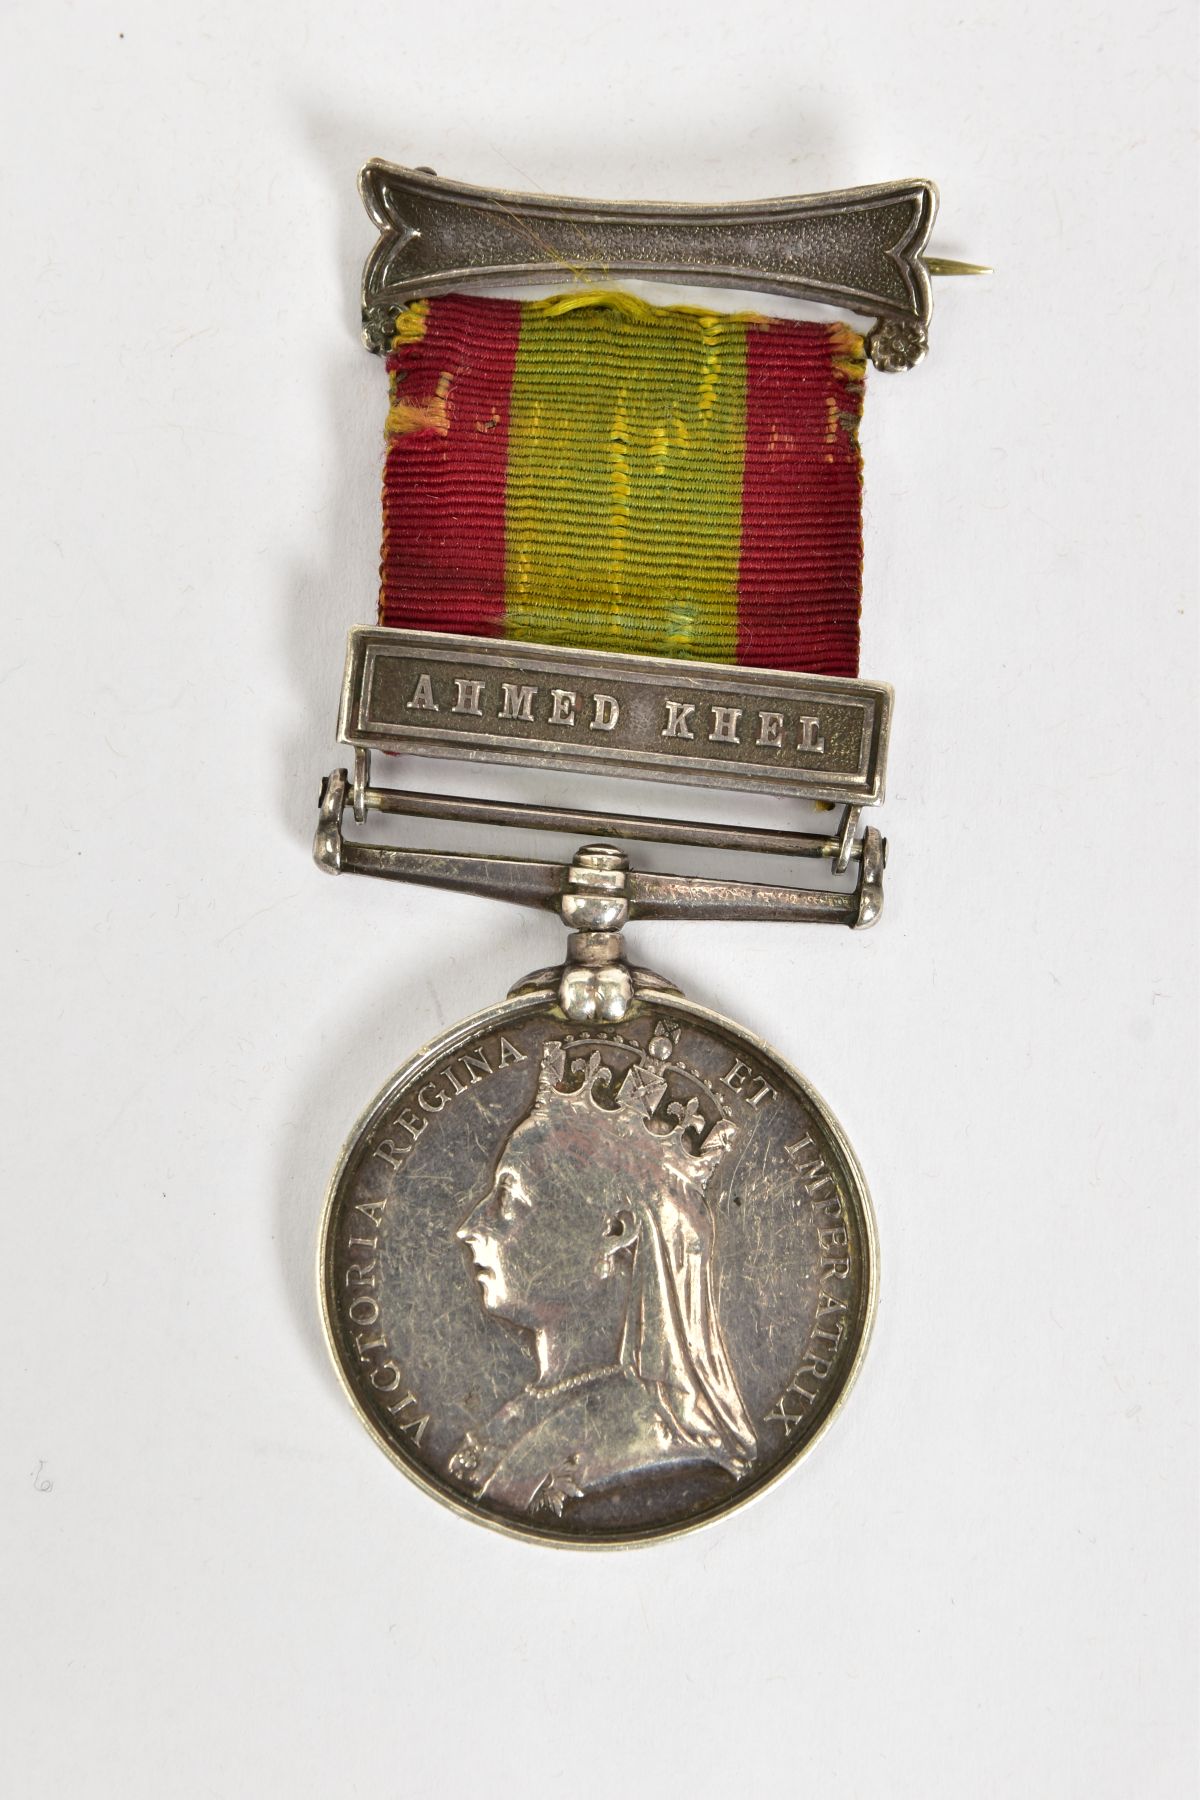 AN AFGHANISTAN MEDAL 1878/9/80 Bar Ahmed Khel, with ribbon period clasp fastener, named to 5251